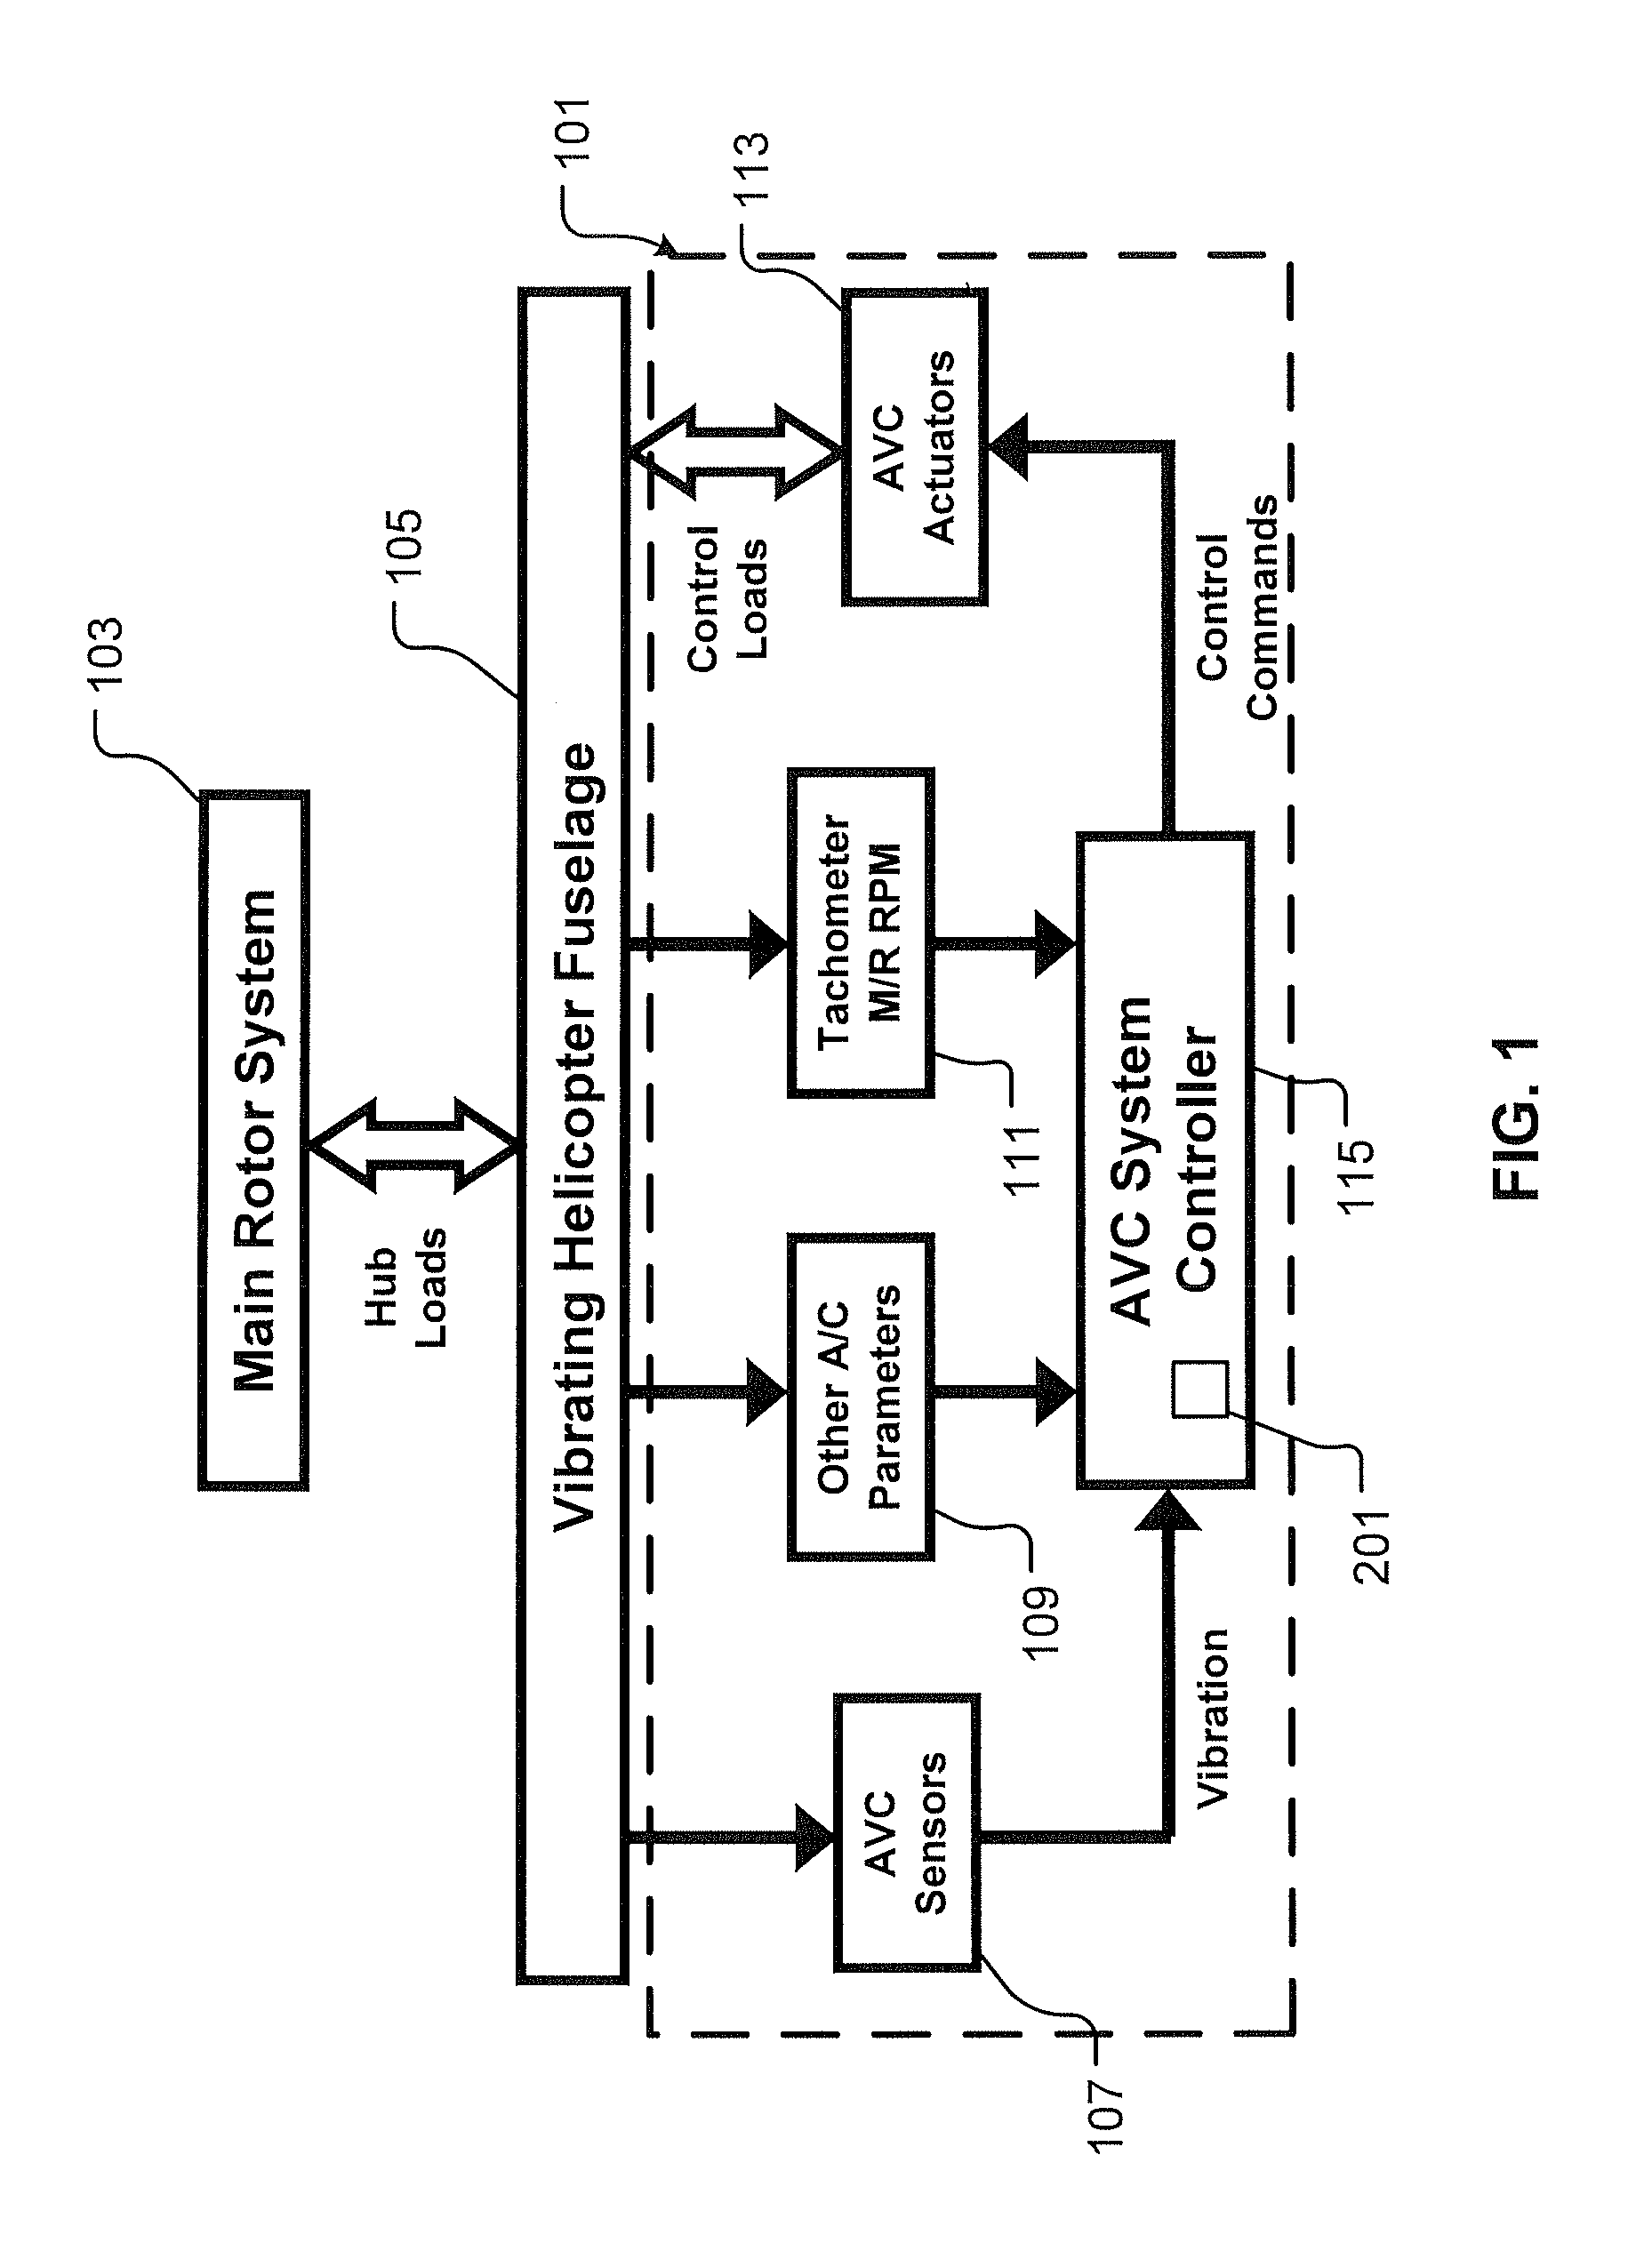 System and Method for Vibration Control in a Rotorcraft Using an Adaptive Reference Model Algorithm